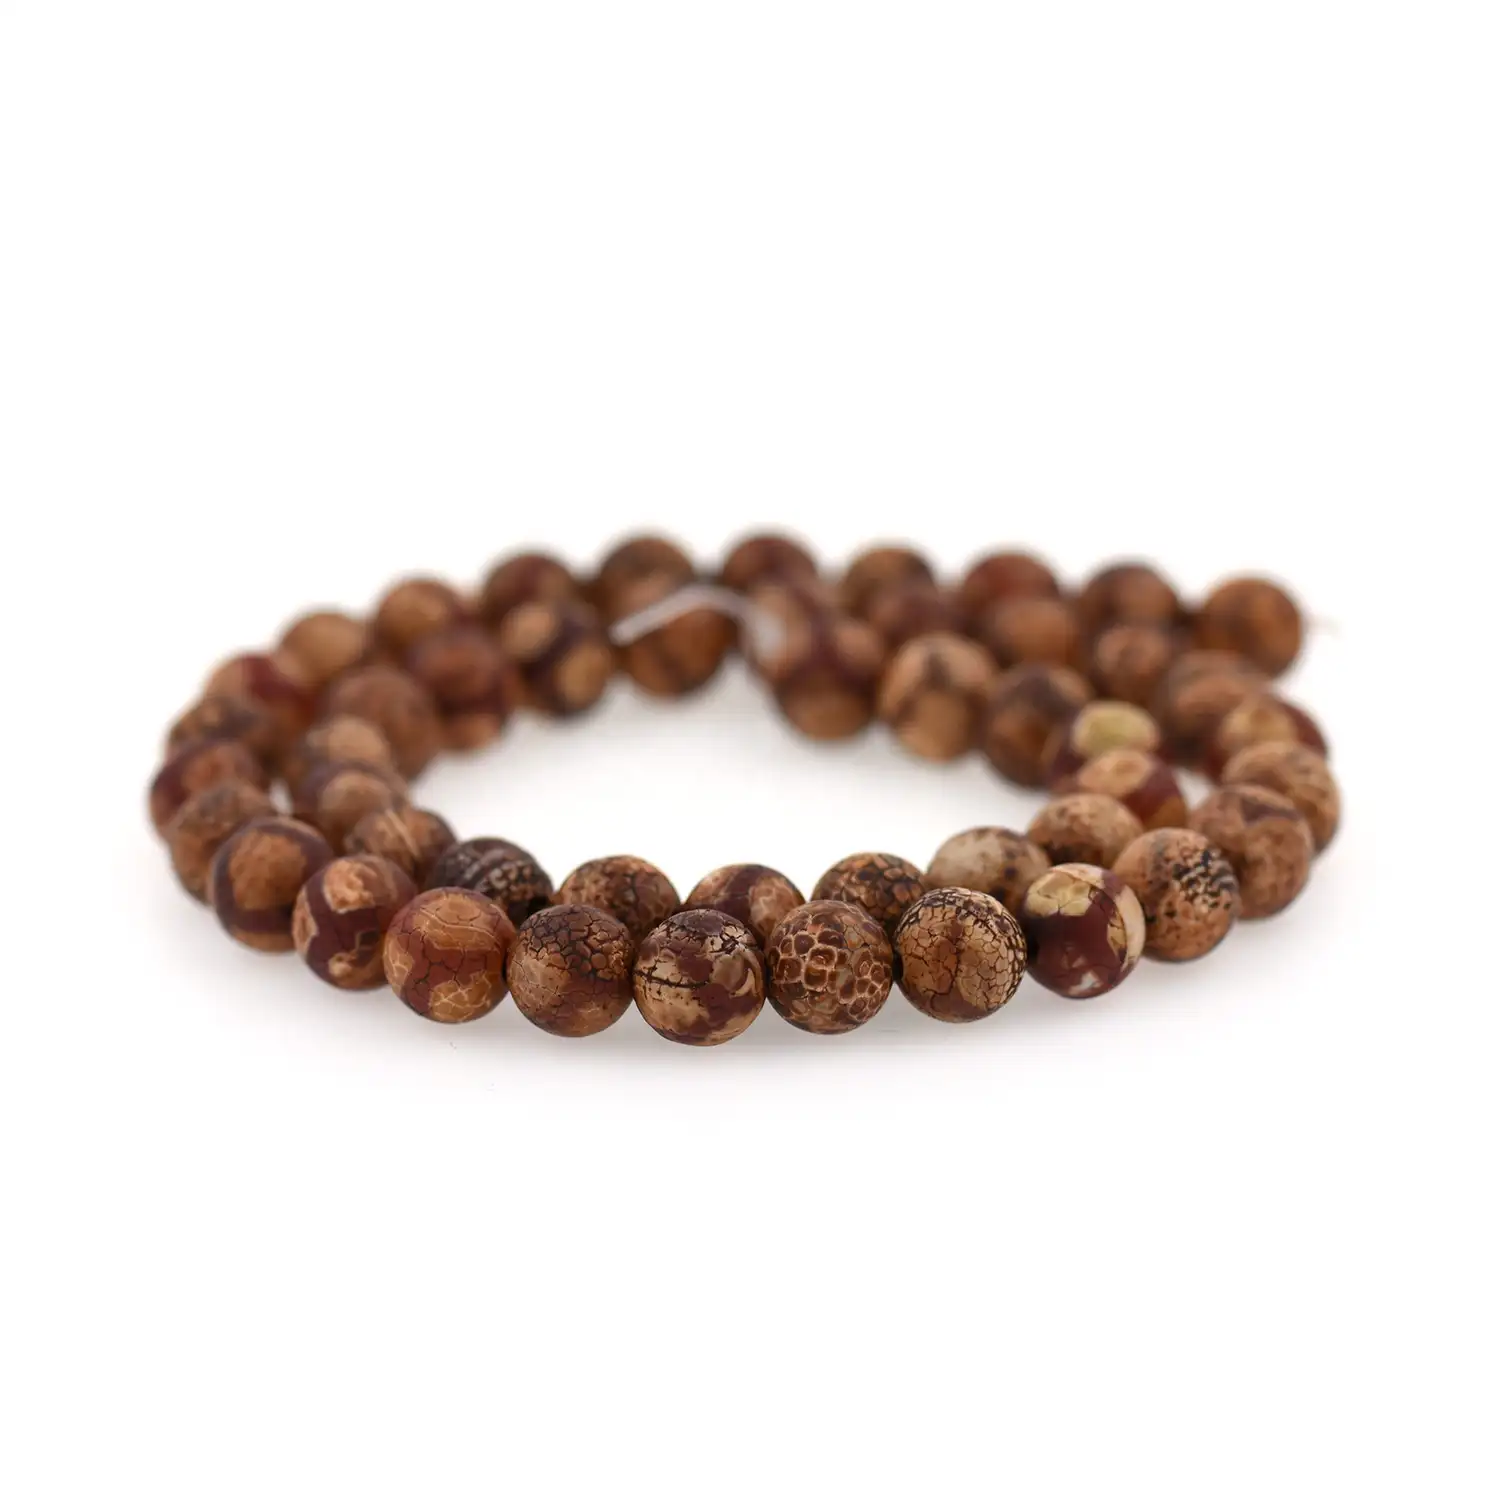 Agate Beads Bead Wholesale High Quality Brown Round Crack Fire Agate Loose Beads Matte Gemstone Bead String DIY Jewelry